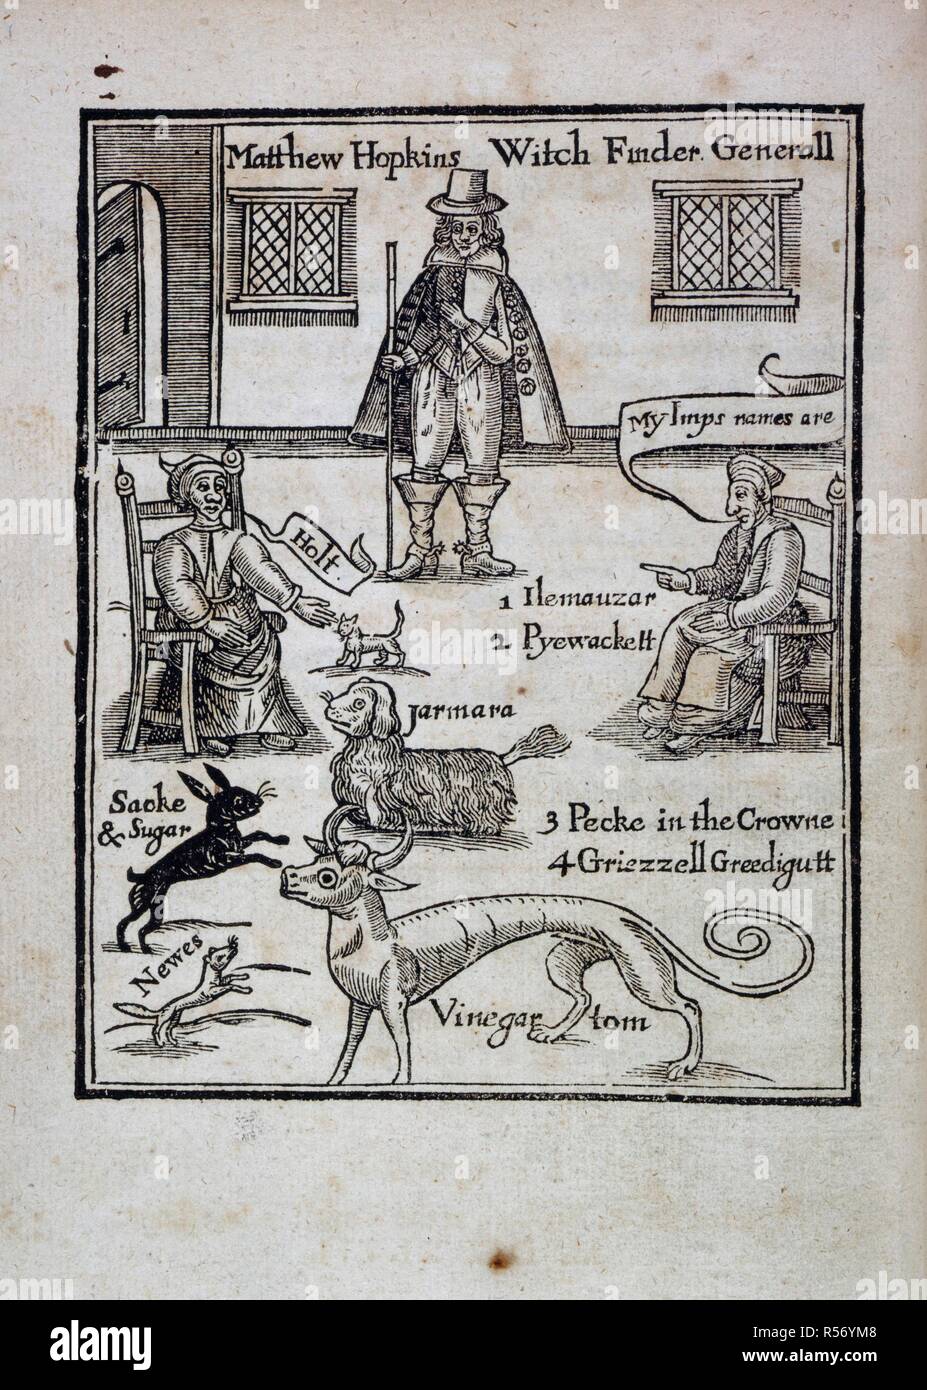 Matthew Hopkins. The discovery of witches: in answer to severall Qu. For R. Royston: London, 1647. Matthew Hopkins (d.1647). English 'witchfinder-general'. Matthew Hopkins interrogating several witches, with their familiars.  Image taken from The discovery of witches: in answer to severall Queries, lately delivered to the Judges of Assize for the County of Norfolk. And now published by Matthew Hopkins Witch-finder, for the benefit of the whole kingdome.  Originally published/produced in For R. Royston: London, 1647. . Source: E.388.(2), frontispiece. Language: English. Stock Photo